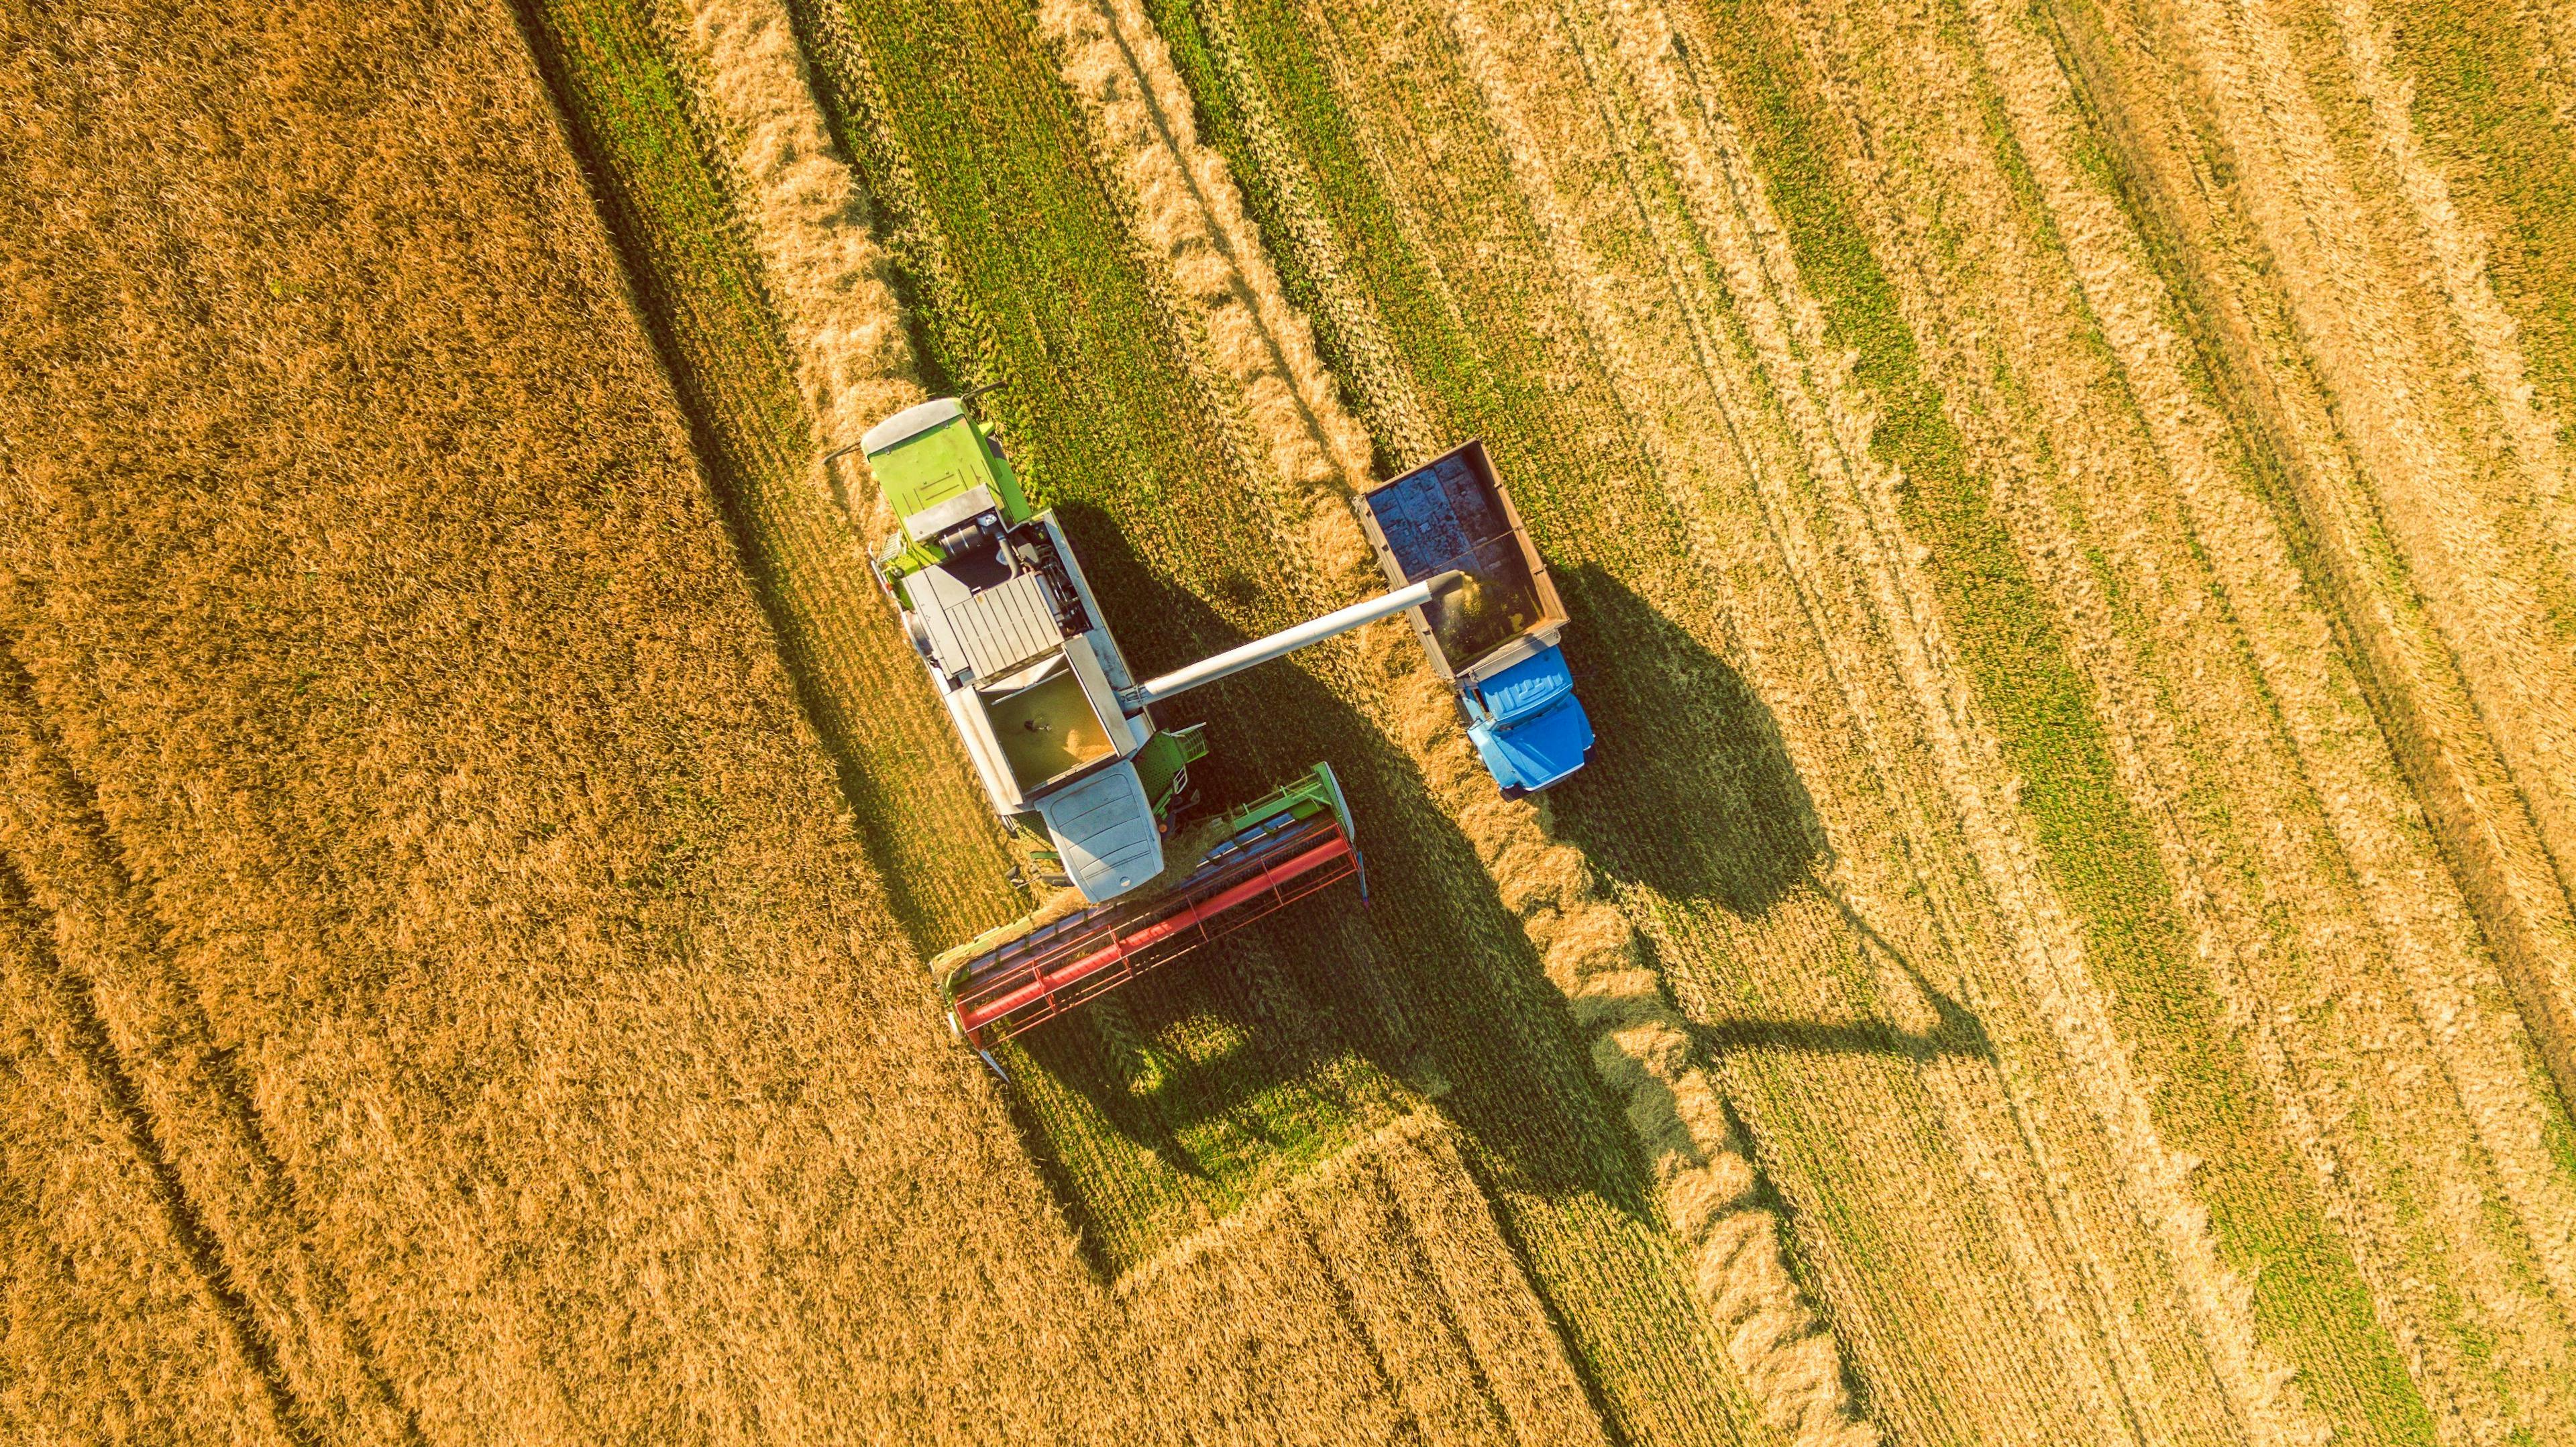 Harvester machine working in field. Combine harvester agriculture machine harvesting golden ripe wheat field. Agriculture. Aerial view. From above. | Image Credit: © LALSSTOCK - stock.adobe.com.